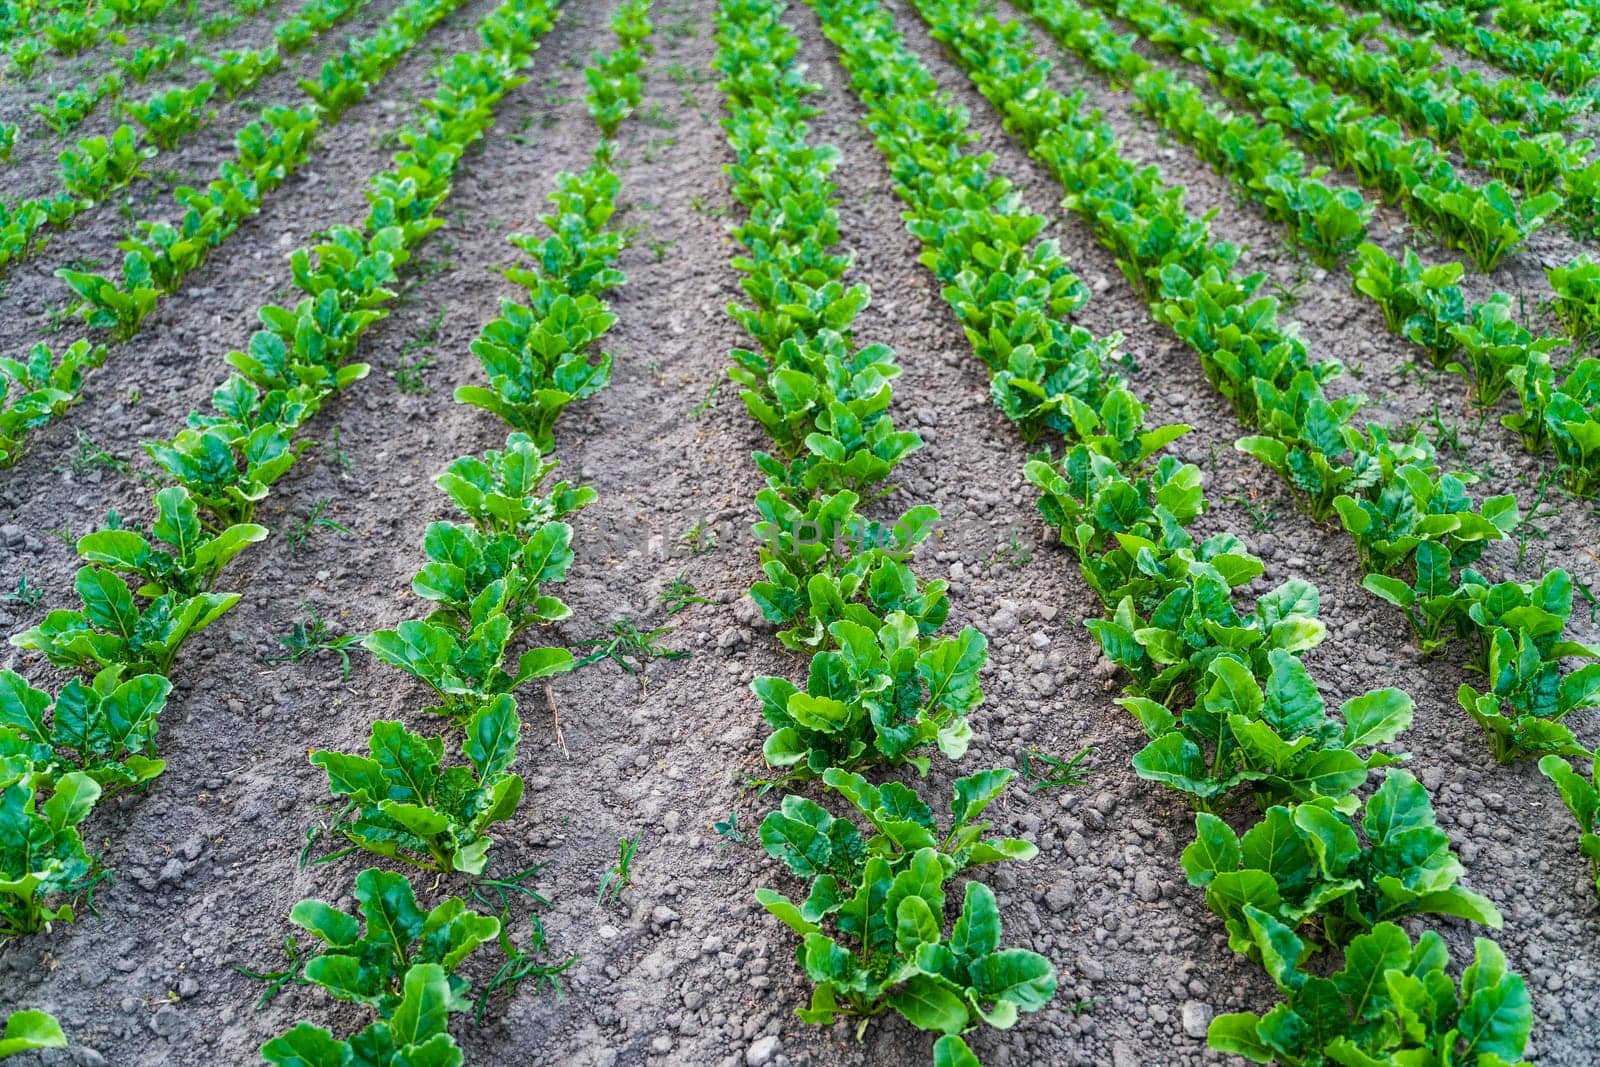 Rows of young fresh beet root leaves. Beetroot plants growing in a fertile soil on a agricultural field. Cultivation of the sugar beet. Agriculture process